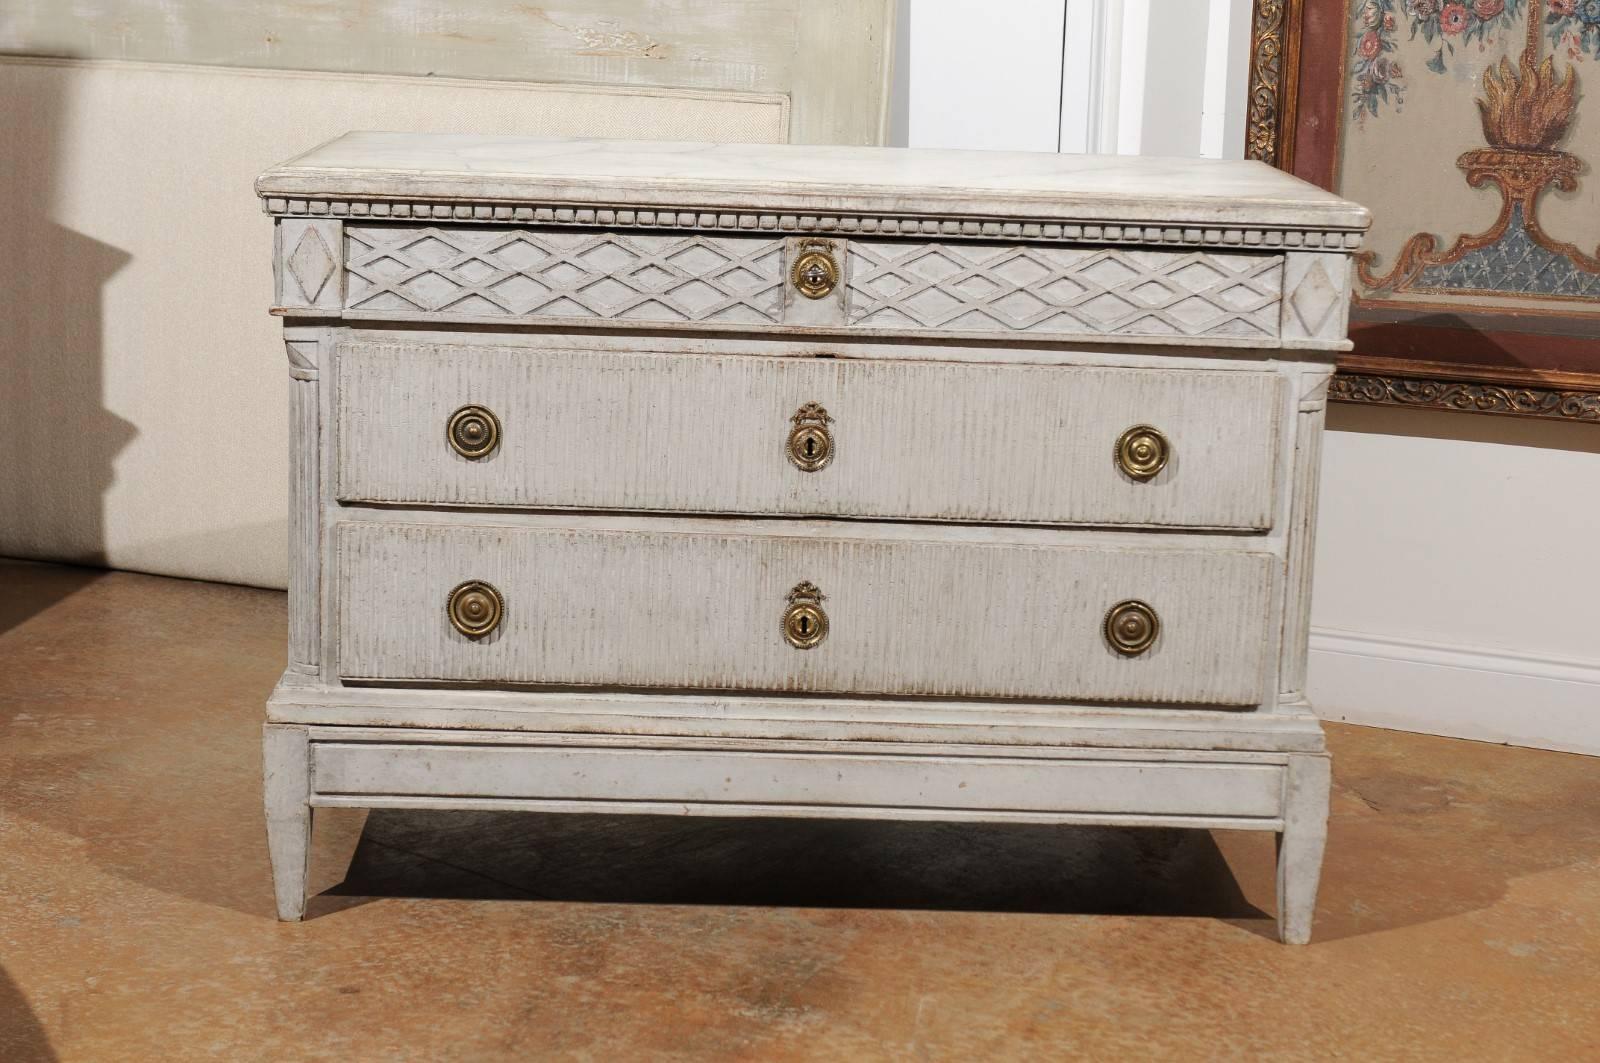 A Swedish period Gustavian three-drawer commode from the late 18th century, with original hardware, marbleized top, trellis motifs and reeded drawers. This exquisite Swedish chest features a slightly raised rectangular faux-marble top, sitting above